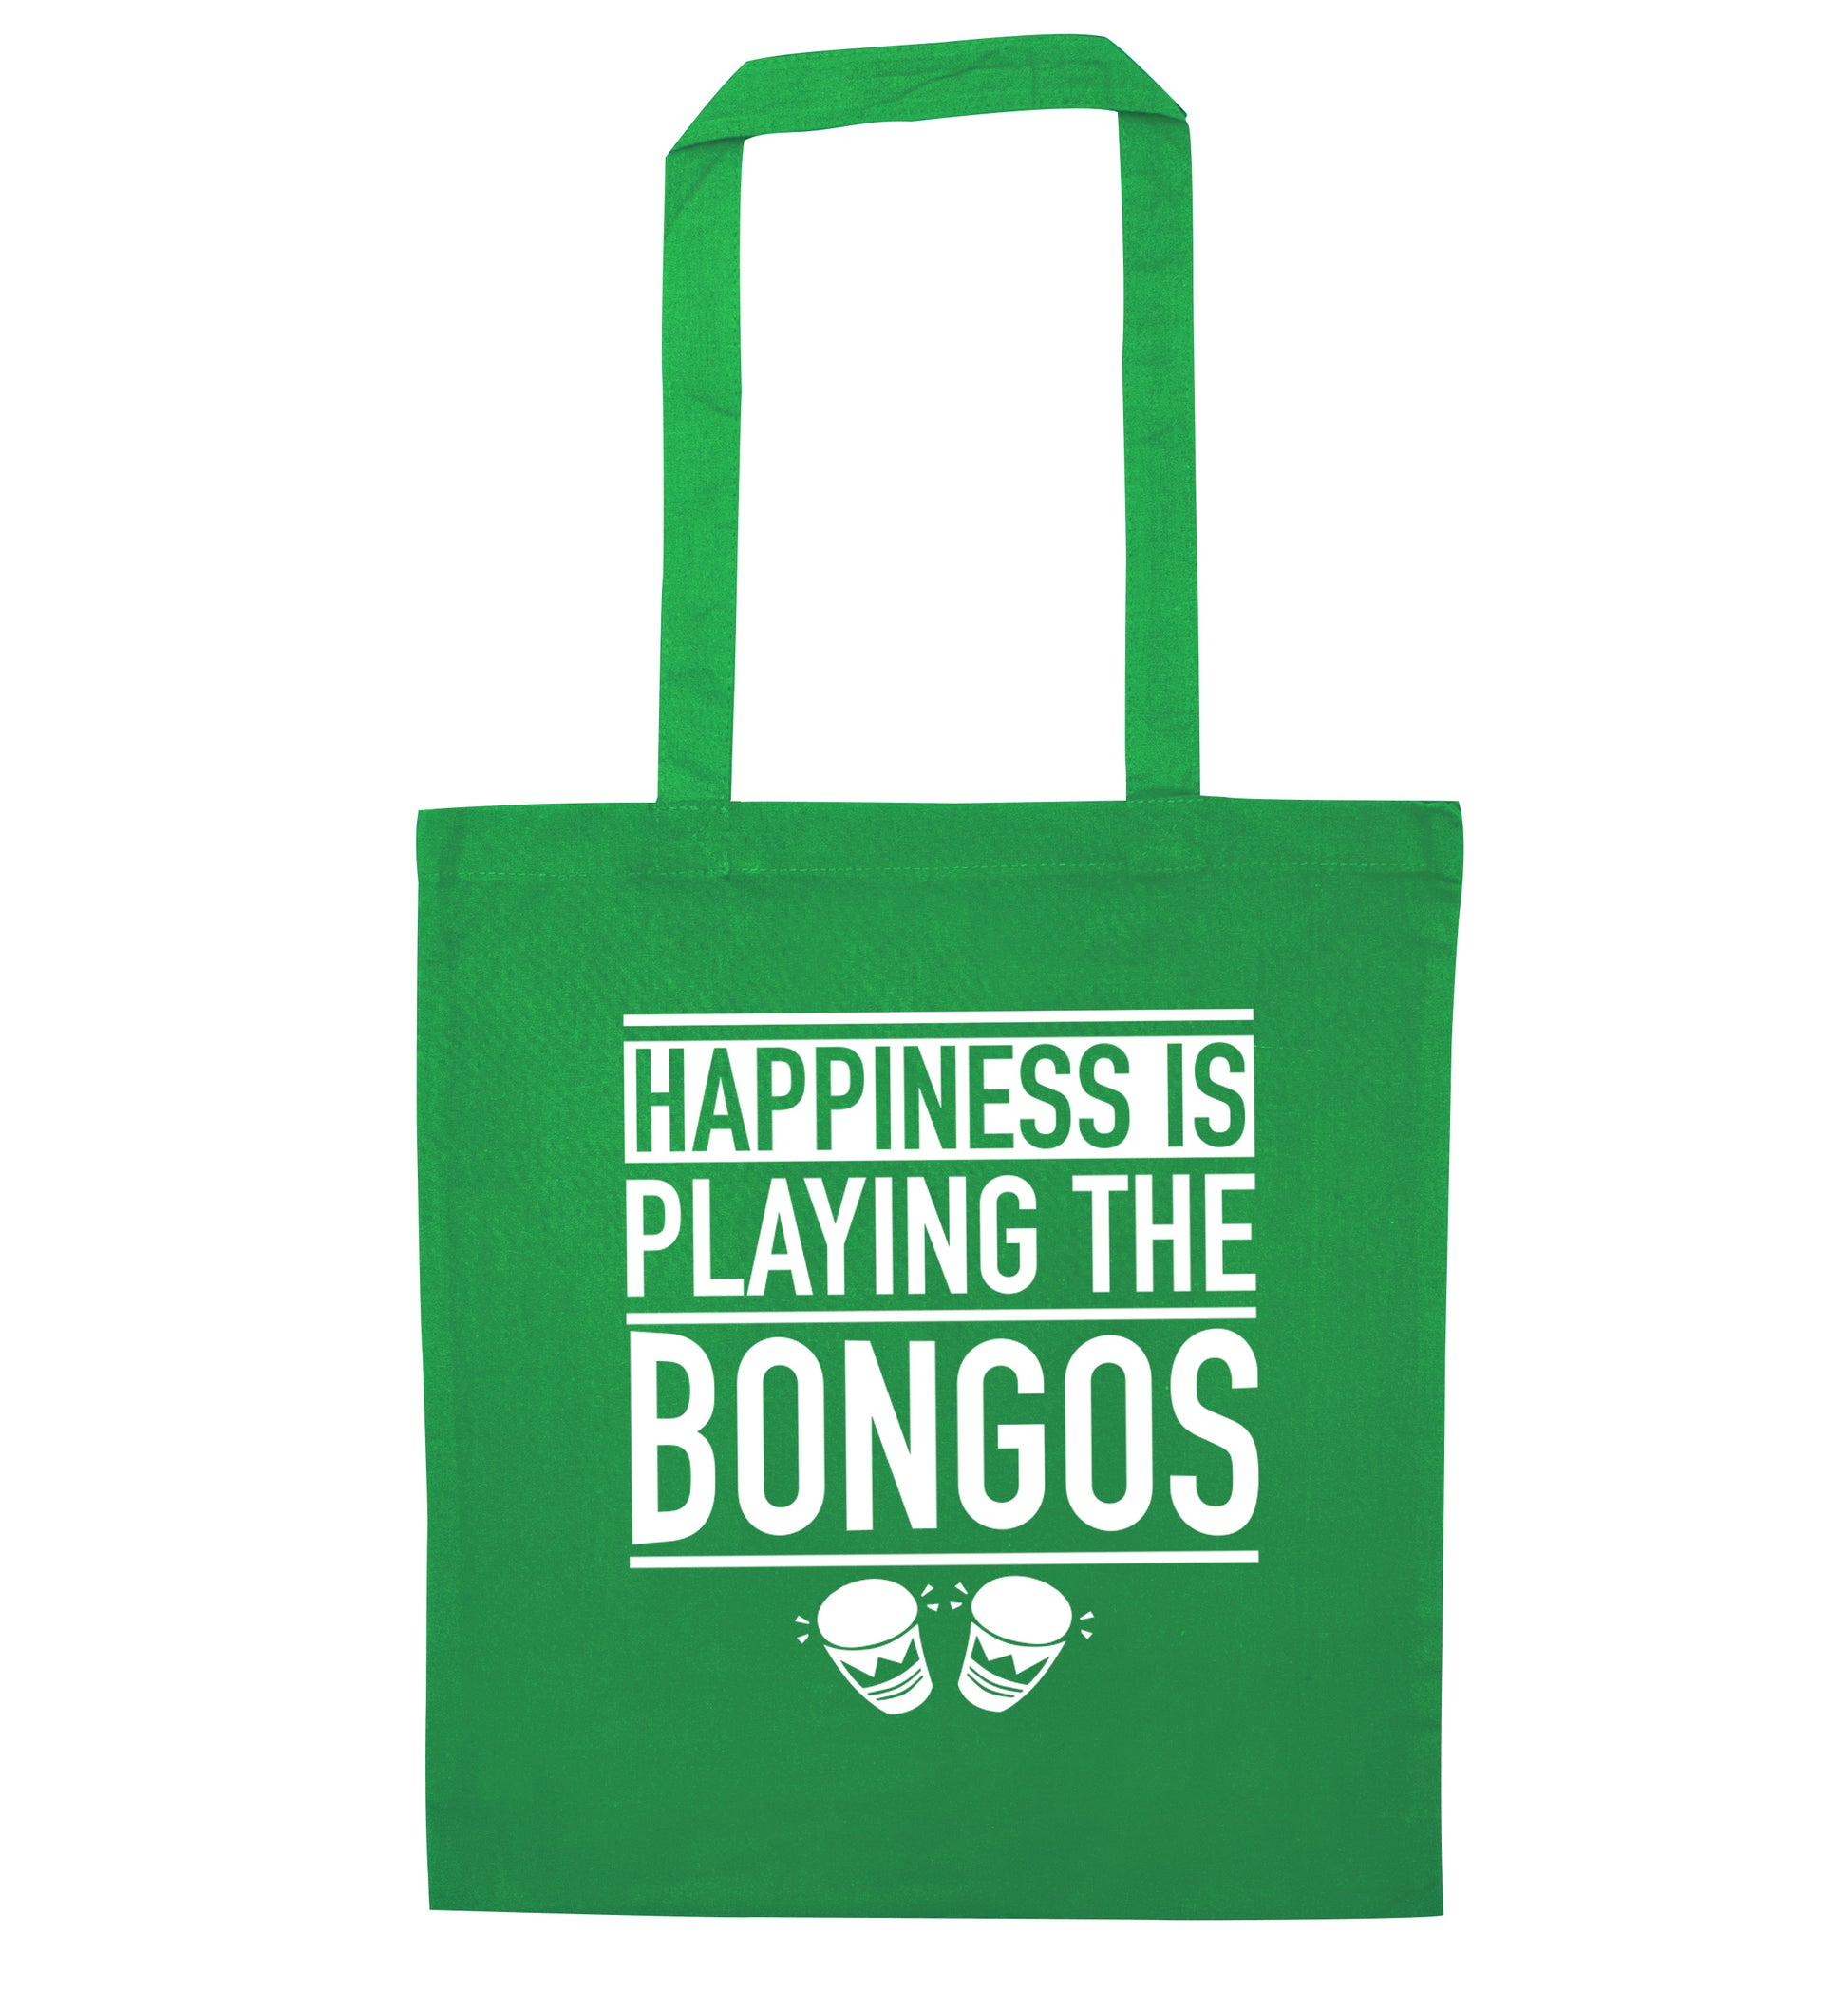 Happiness is playing the bongos green tote bag